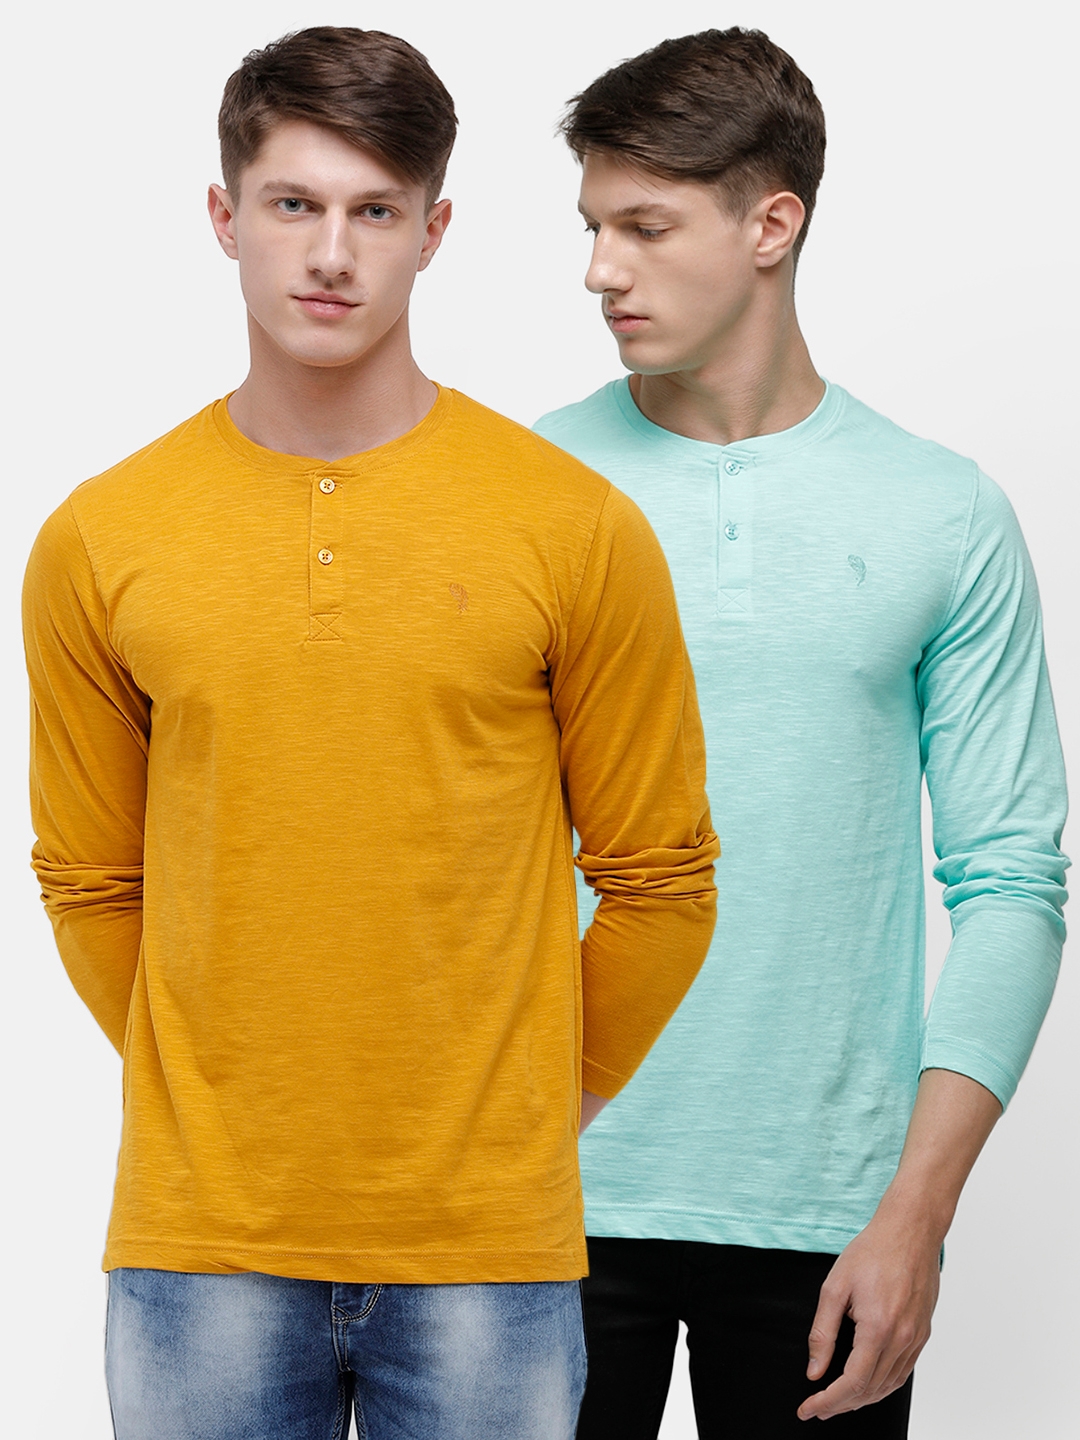 Classic Polo | Classic Polo Men's Cotton Slim Fit Combo Tshirt - Pack Of 2 